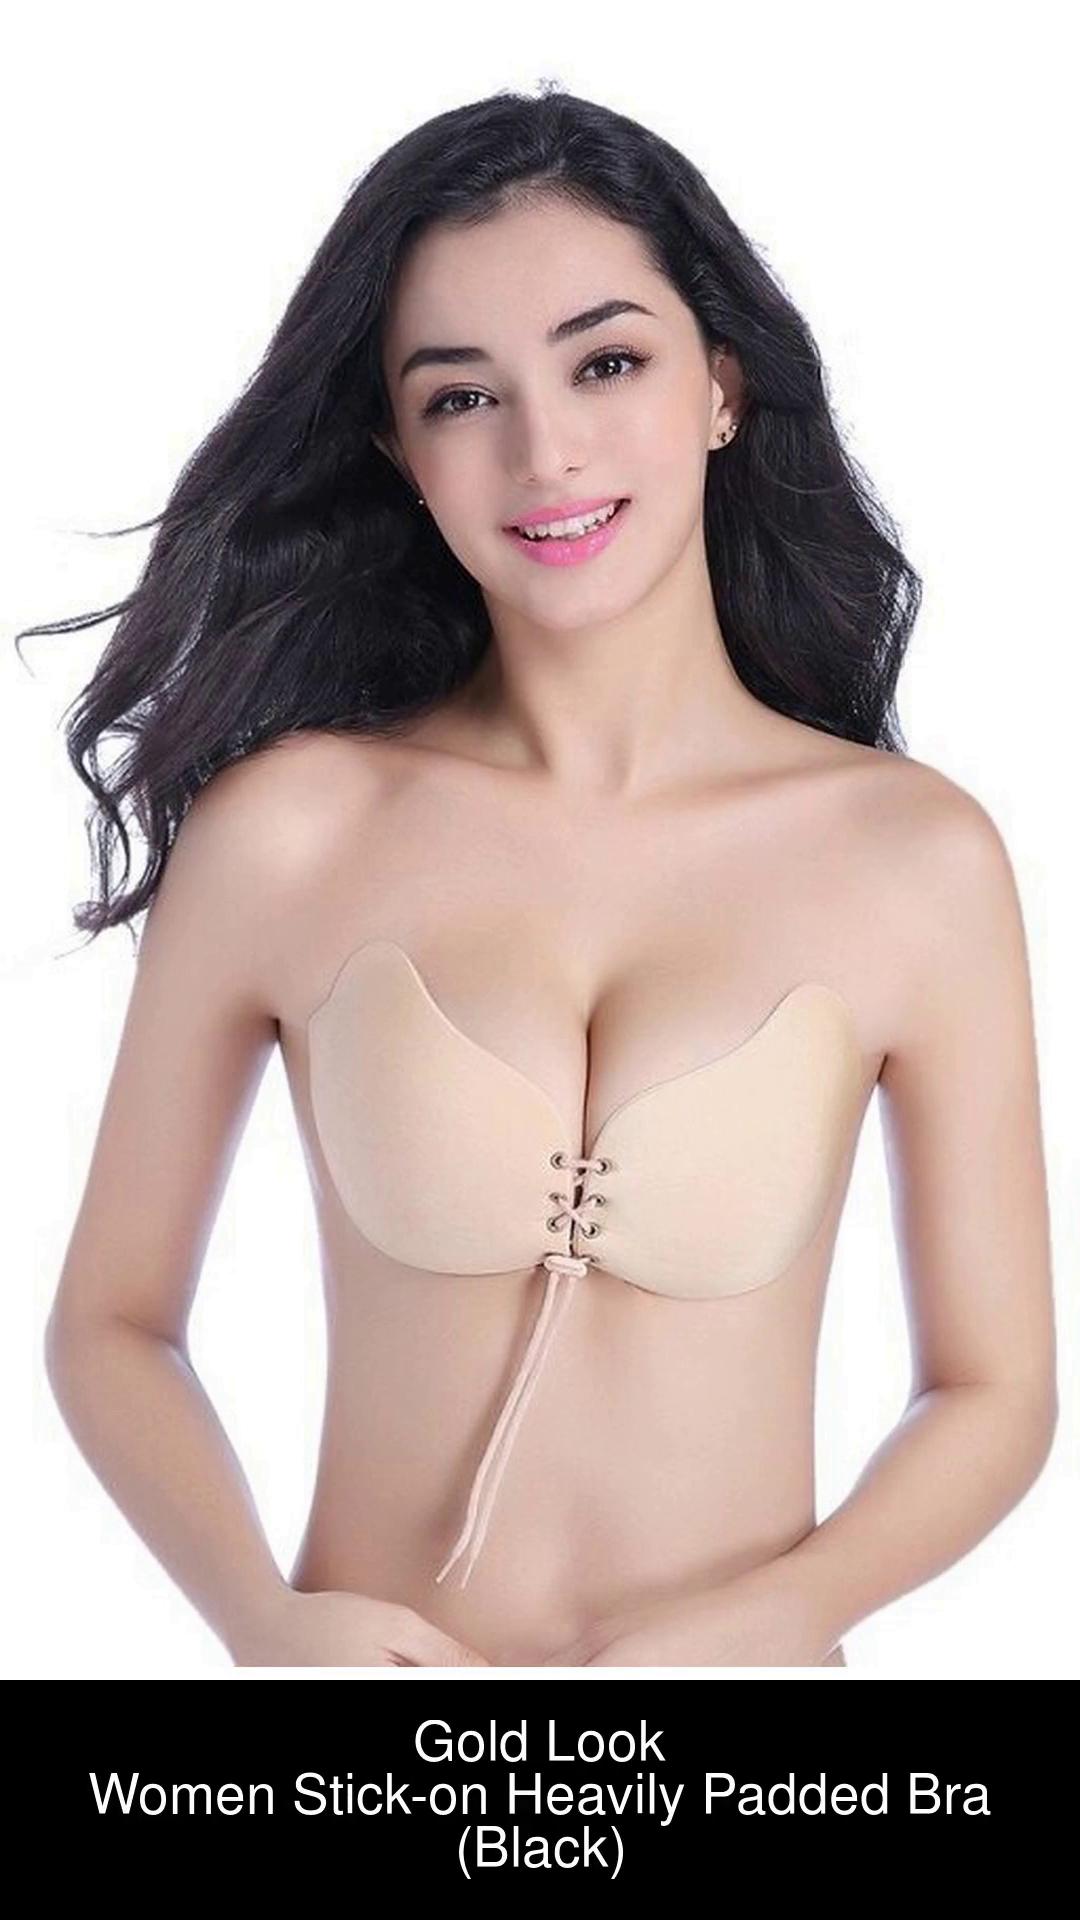 Lure Wear Women Push-up Non Padded Bra - Buy White, Pink, Beige Lure Wear  Women Push-up Non Padded Bra Online at Best Prices in India